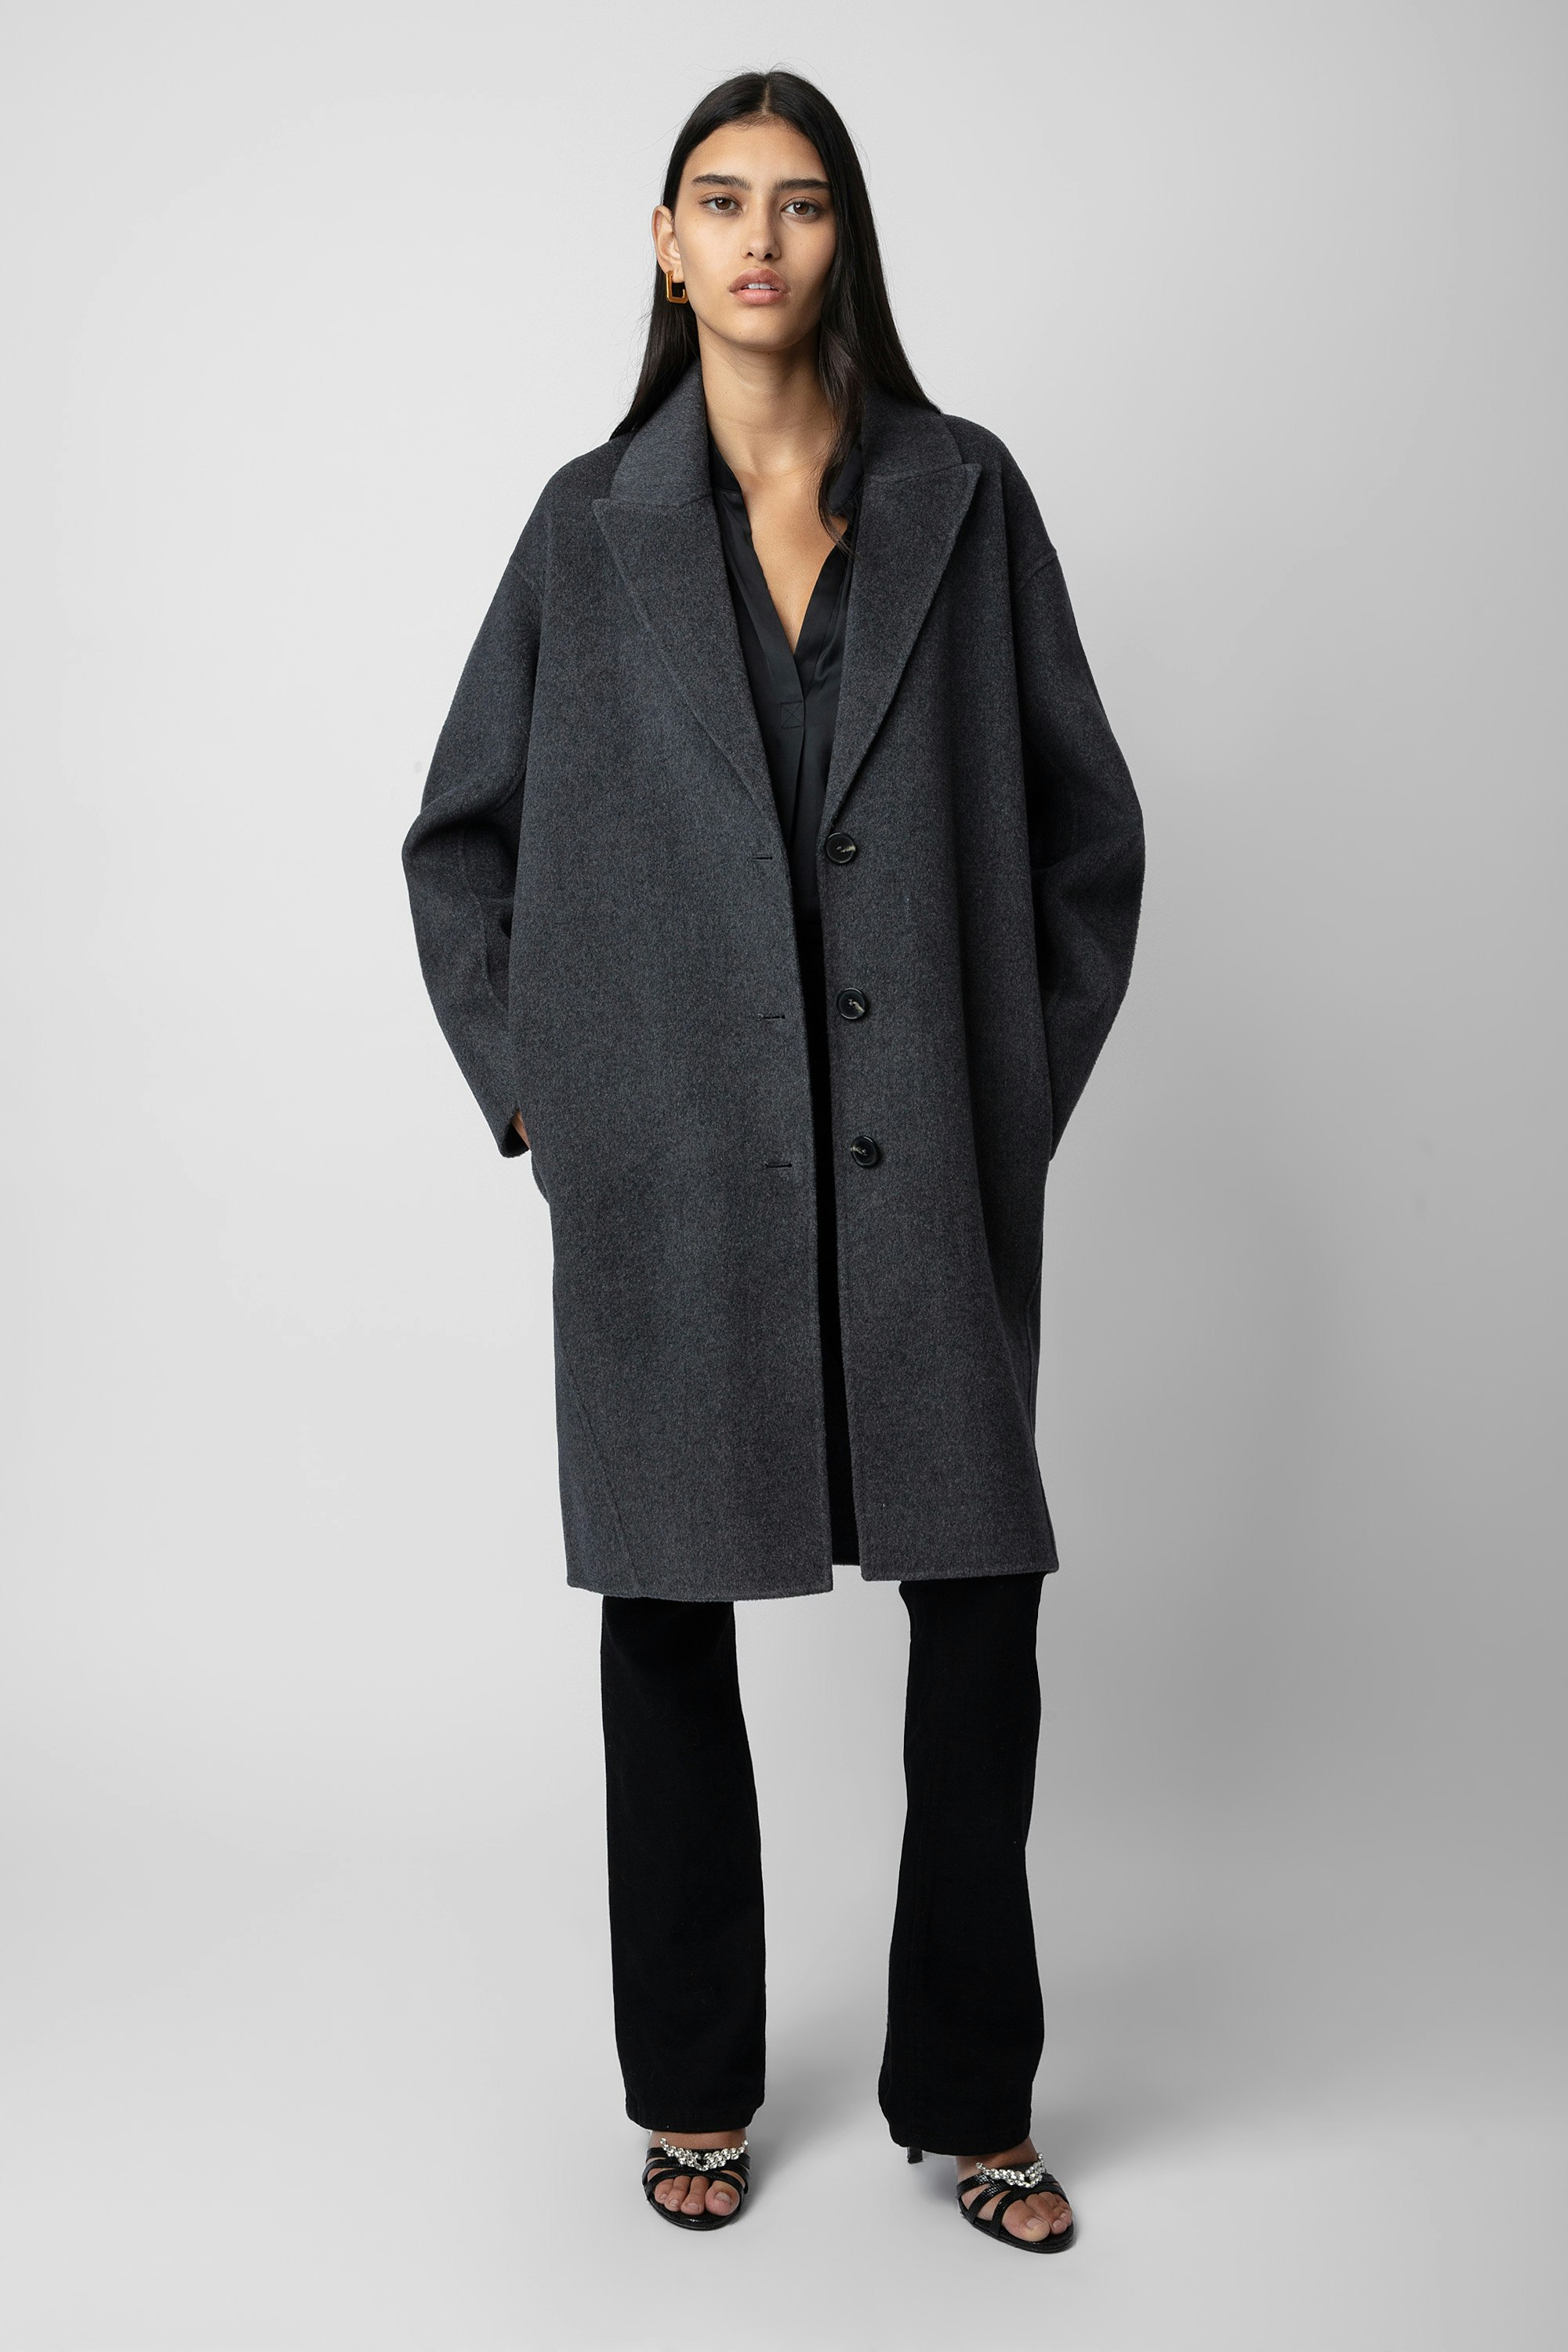 Mady Coat - Women's long anthracite wool coat with buttons and embellished with a wing motif on the back.